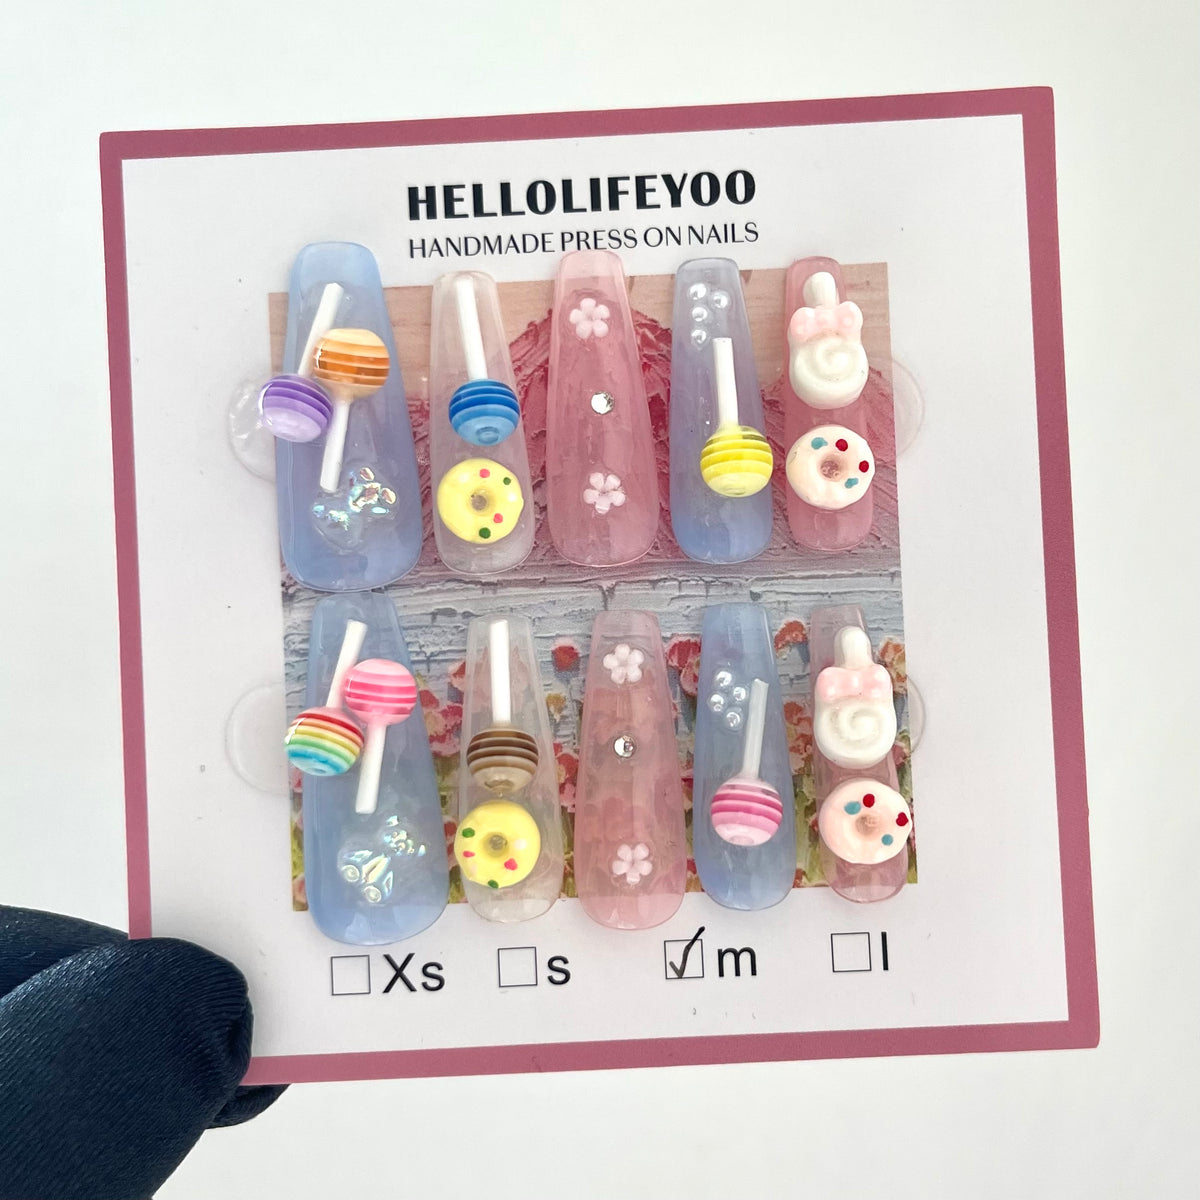 LOLLIPOP-TEN PIECES OF HANDCRAFTED PRESS ON NAIL